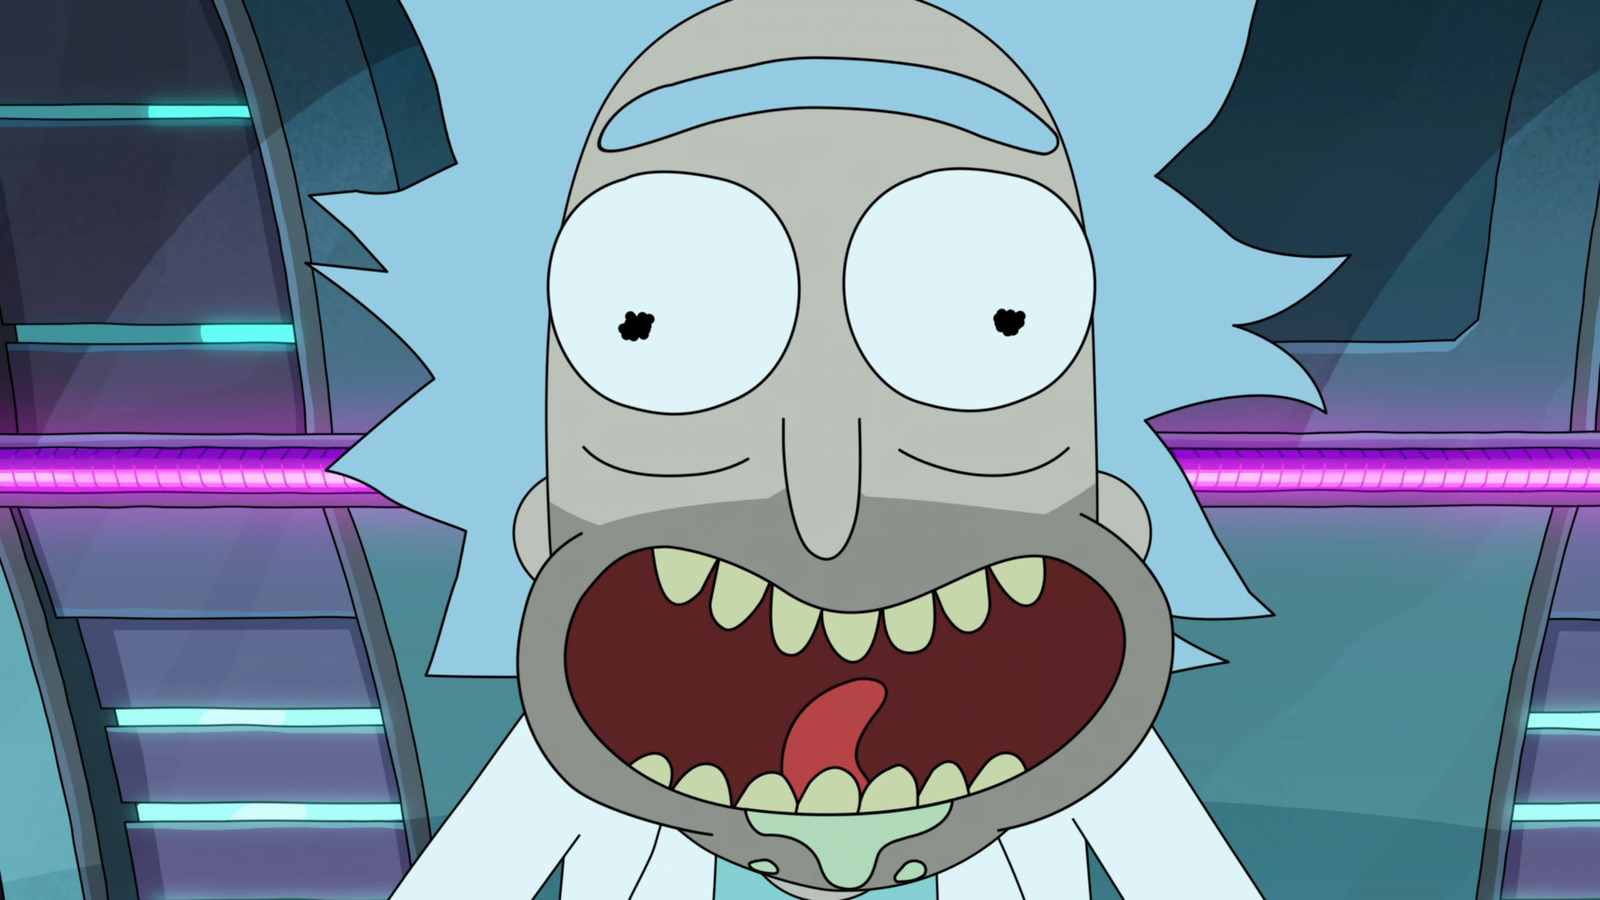 Who Is Voicing 'Rick and Morty' Instead of Justin Roiland?